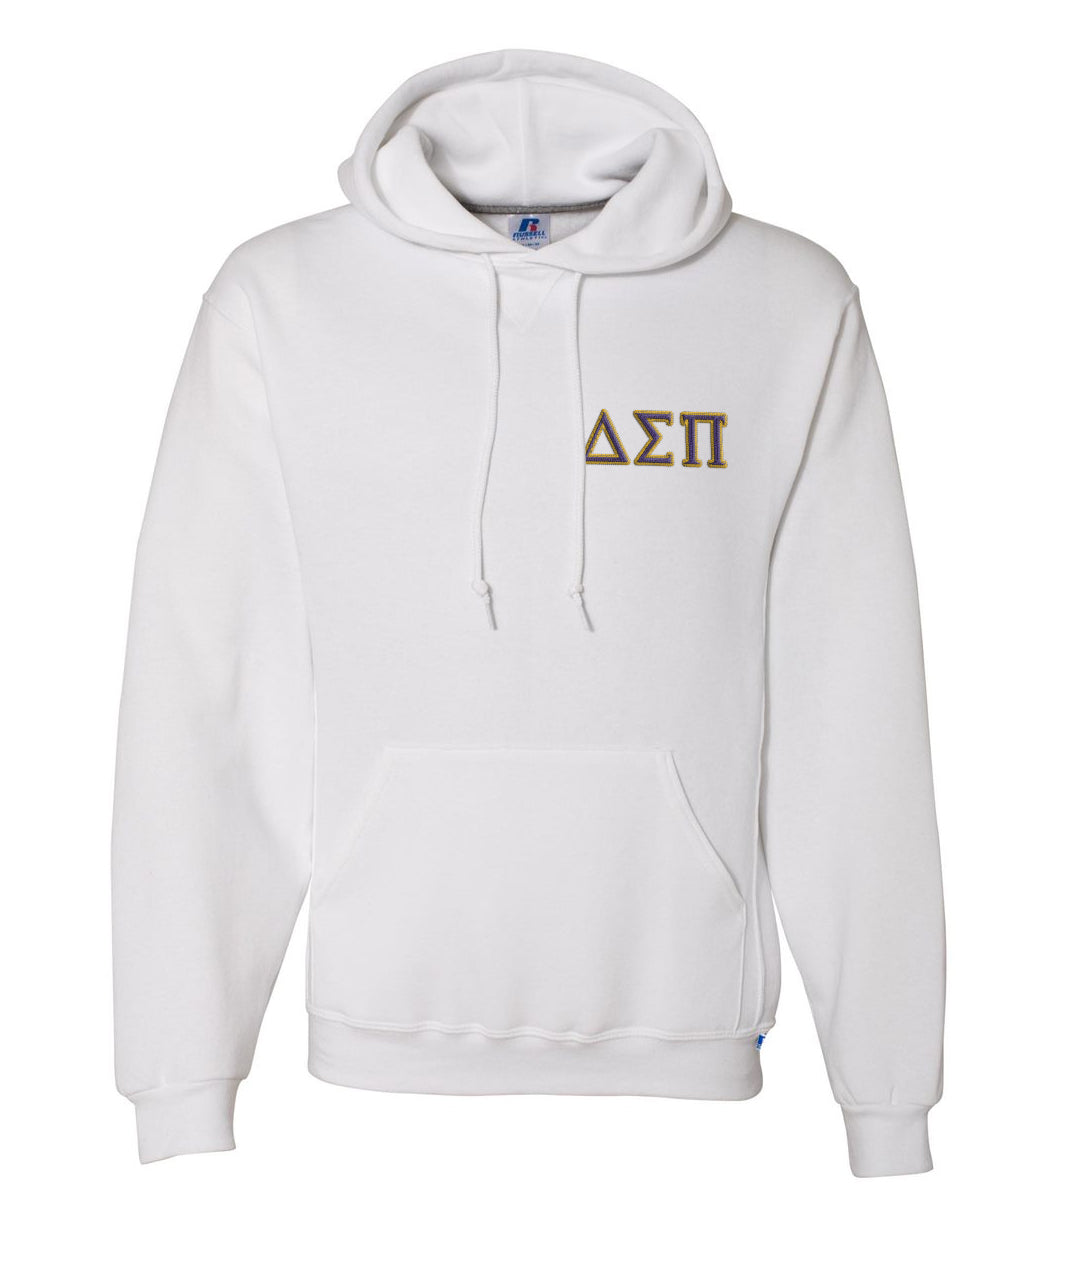 Delta Sigma Pi Embroidered Hoodie